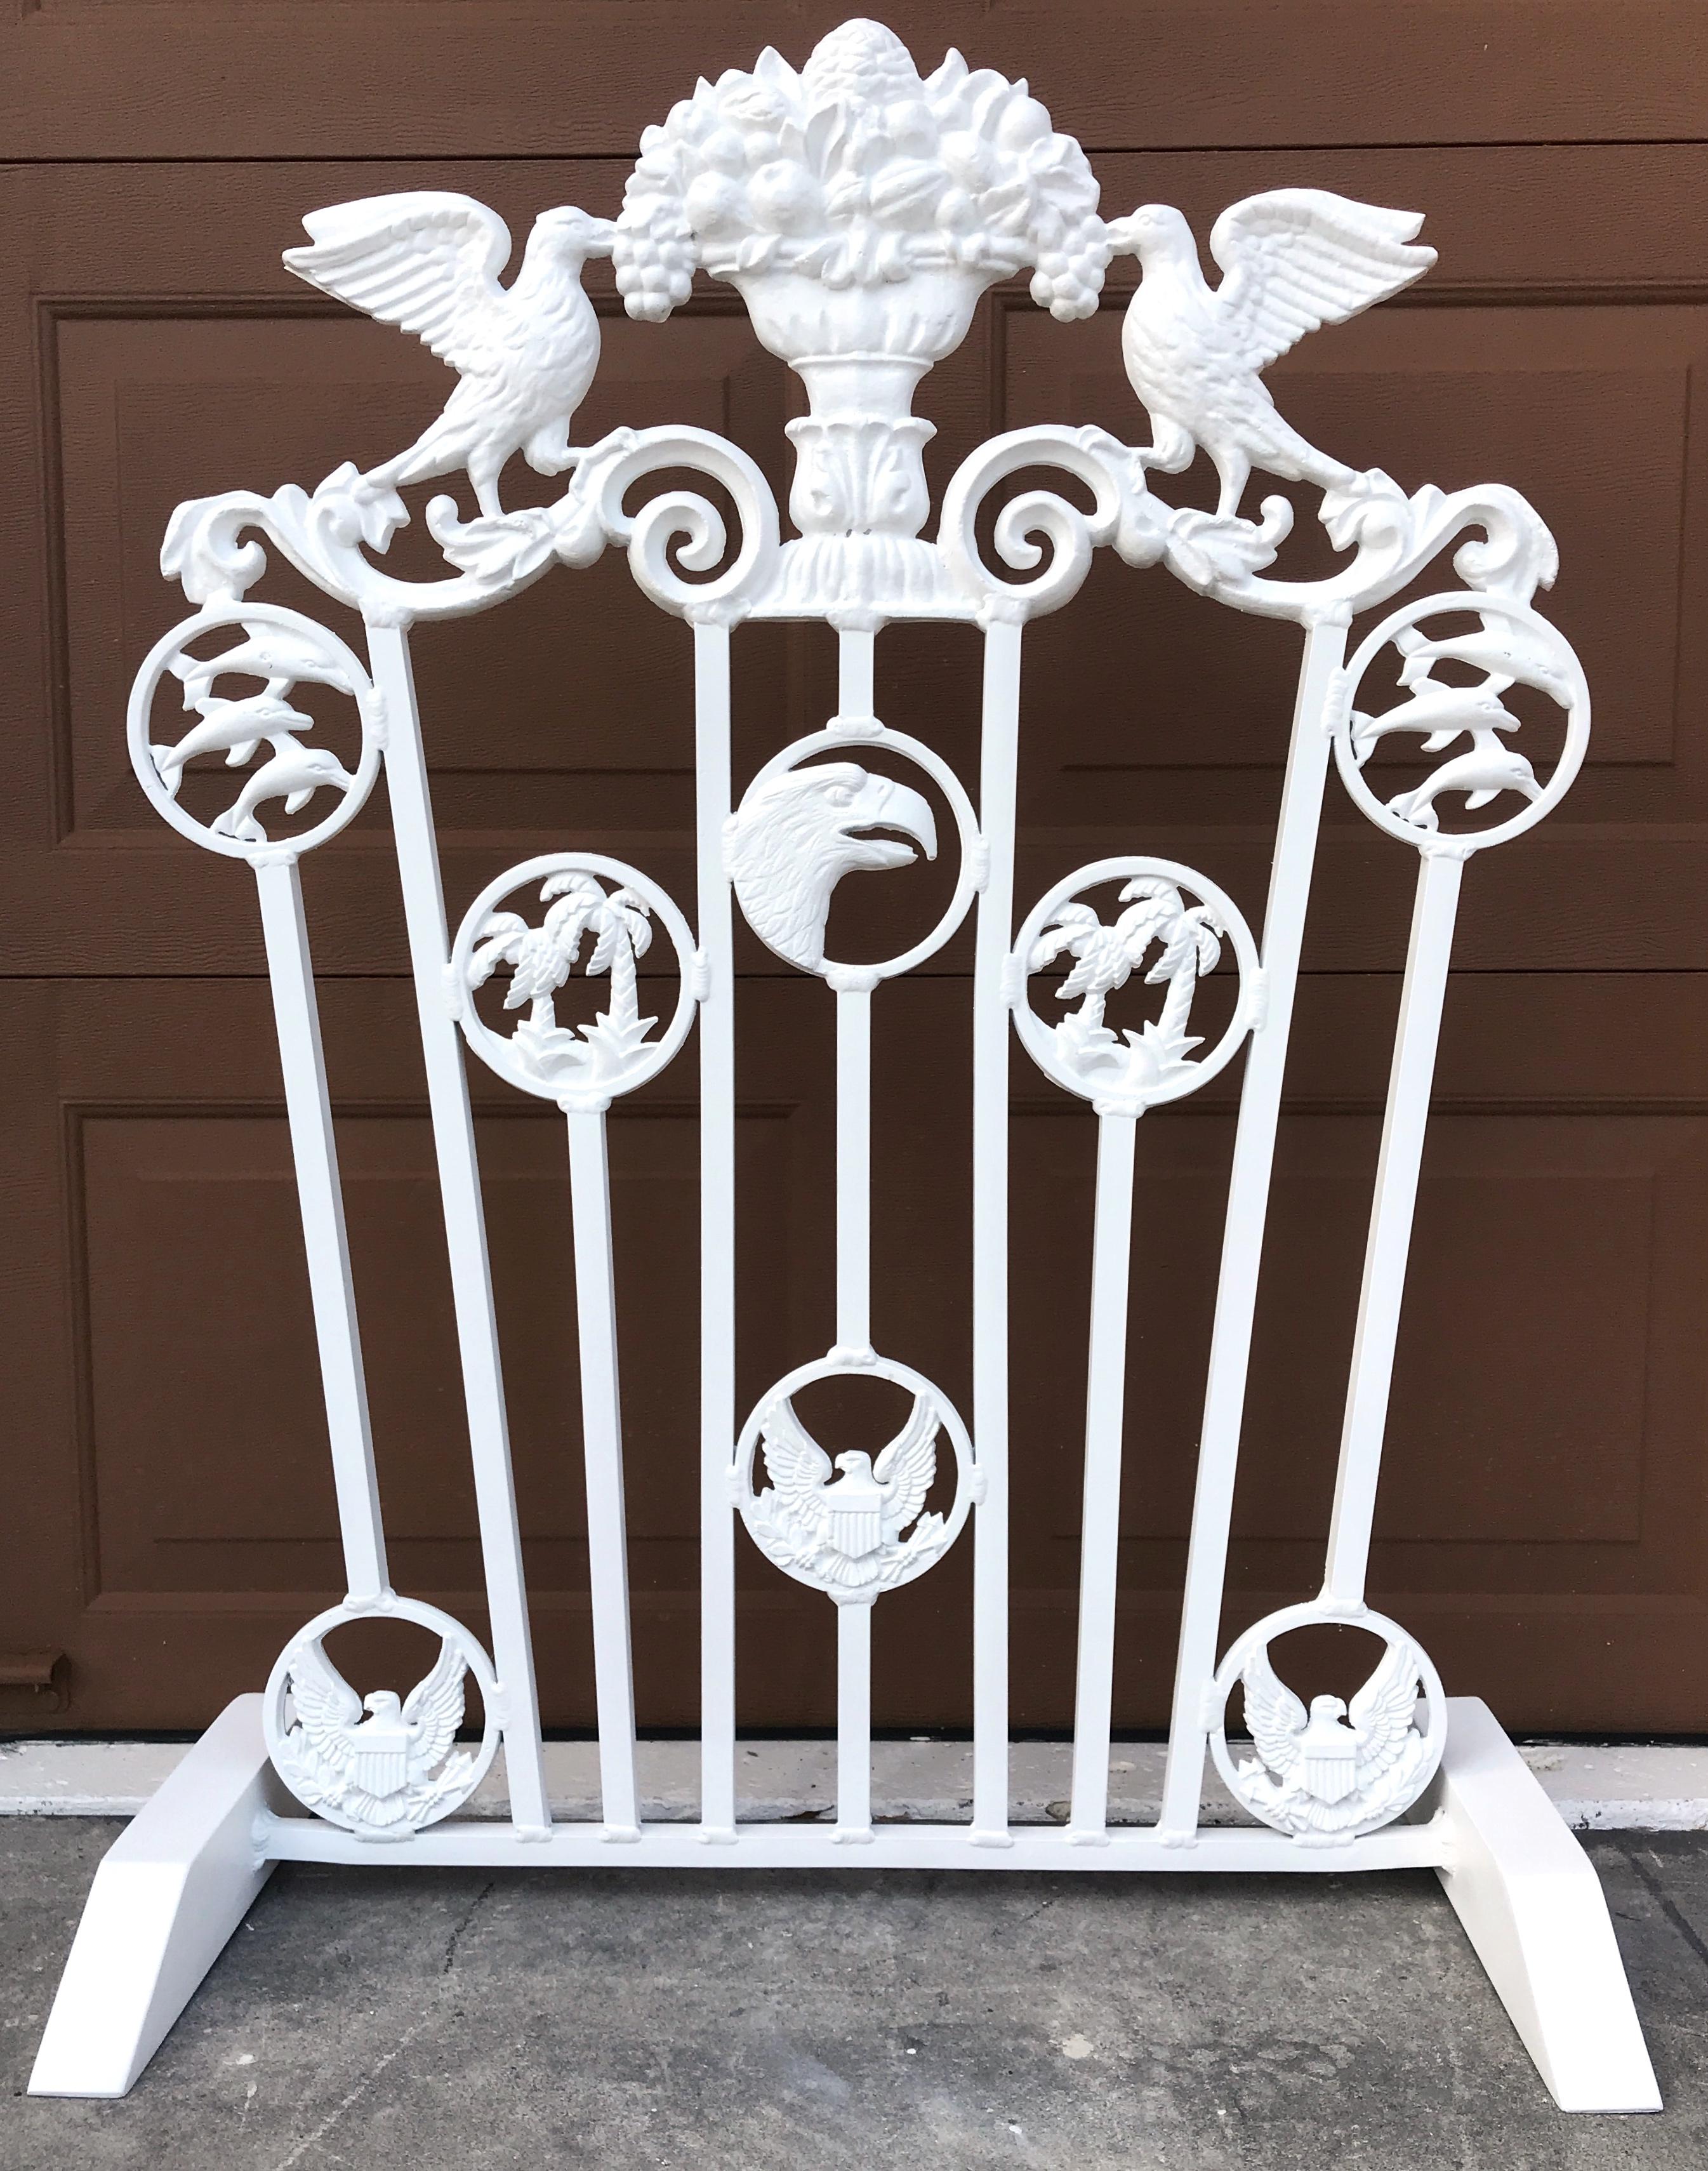 Presidential outdoor firescreen or garden grate Truman Little White House, Key West, FL
A rare find, with medallions of Dolphins, Palm trees, Bald Eagle and The Seal of the President of the United States, by repute from the Harry S Truman Little